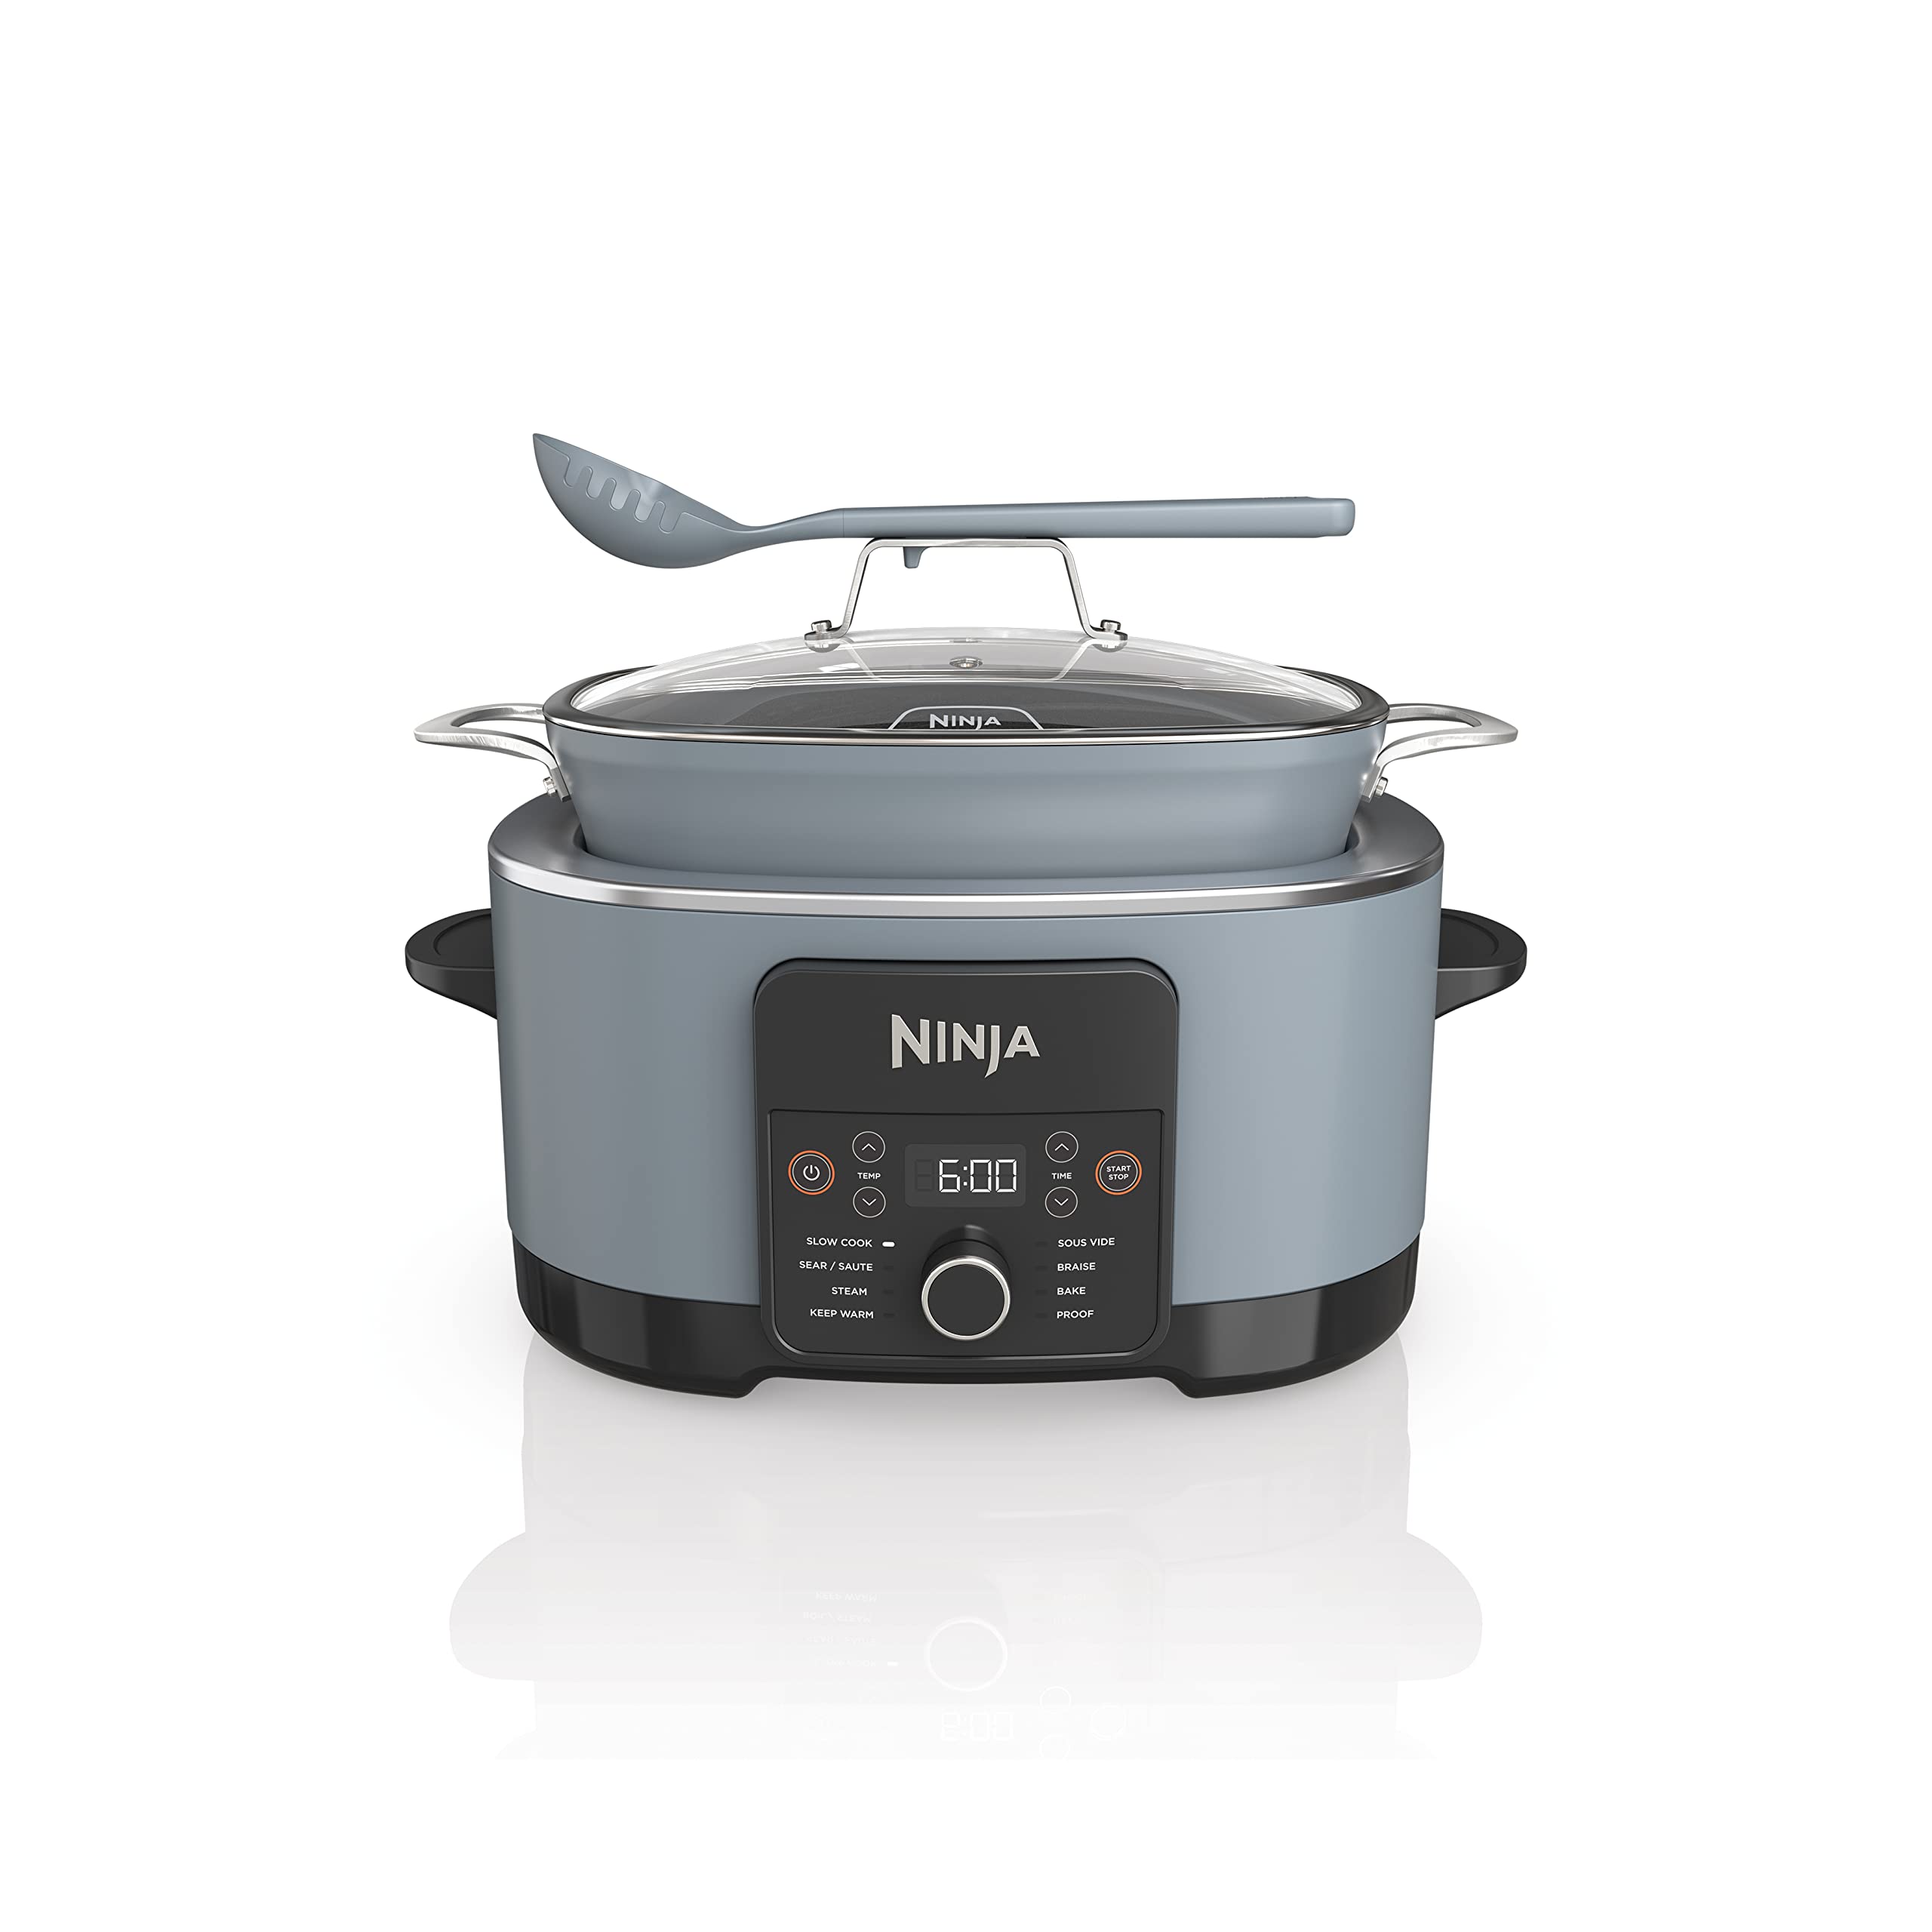 Ninja MC1001 Foodi PossibleCooker PRO 8.5 Quart Multi-Cooker, with 8-in-1 Slow Cooker, Dutch Oven, Steamer & More, Glass Lid & Integrated Spoon, Nonstick, Oven Safe Pot to 500°F, Sea Salt Gray